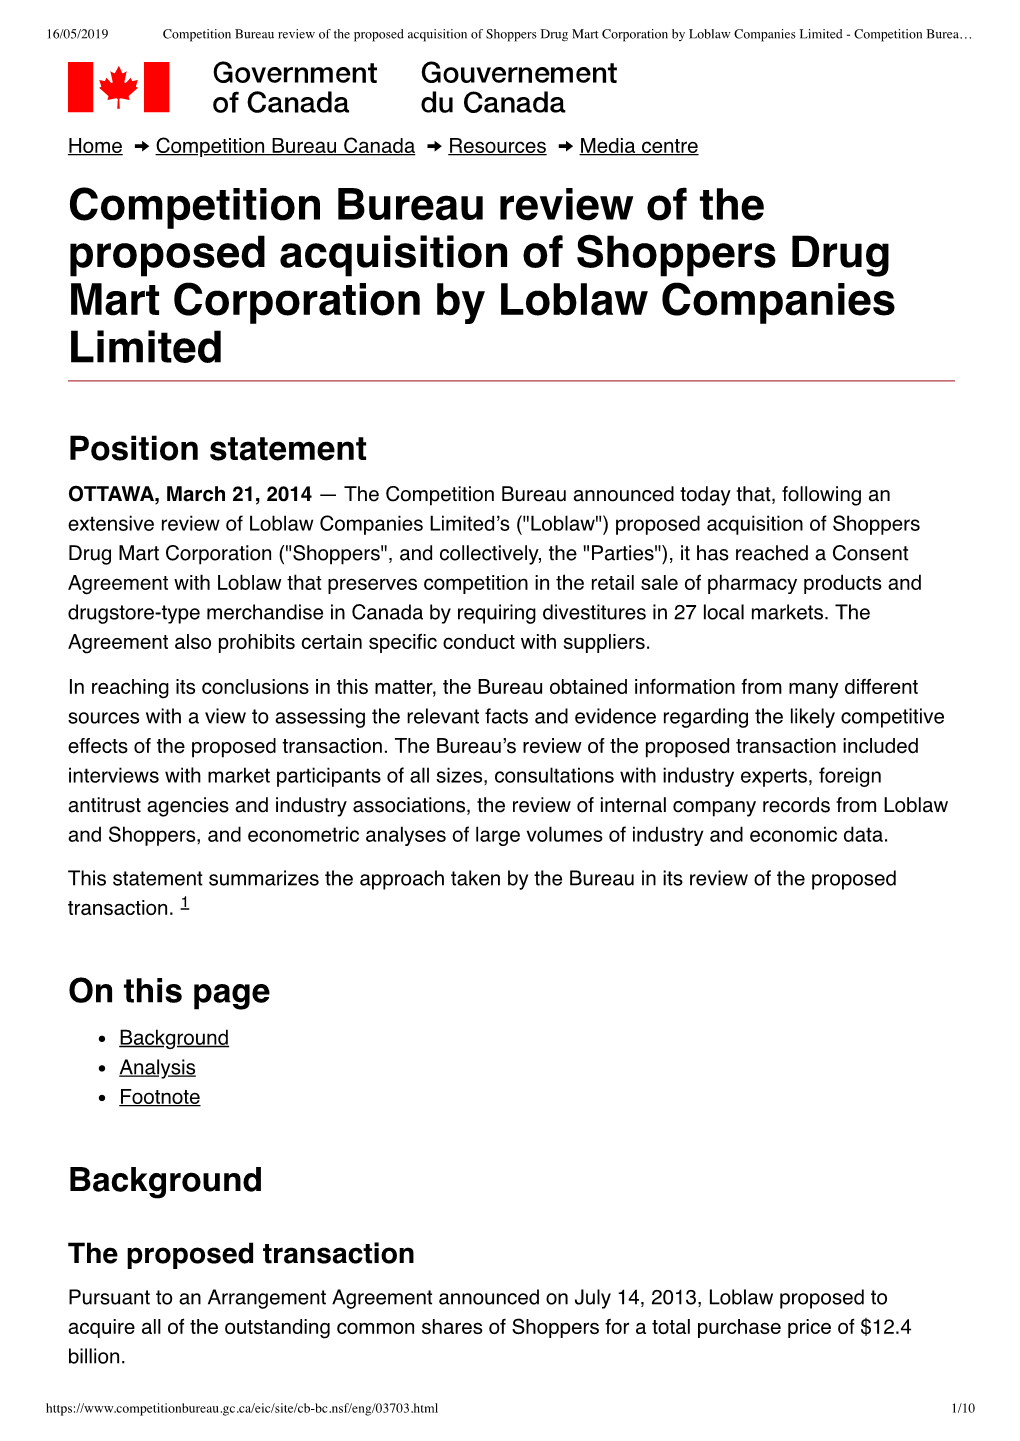 Competition Bureau Review of the Proposed Acquisition of Shoppers Drug Mart Corporation by Loblaw Companies Limited - Competition Burea…